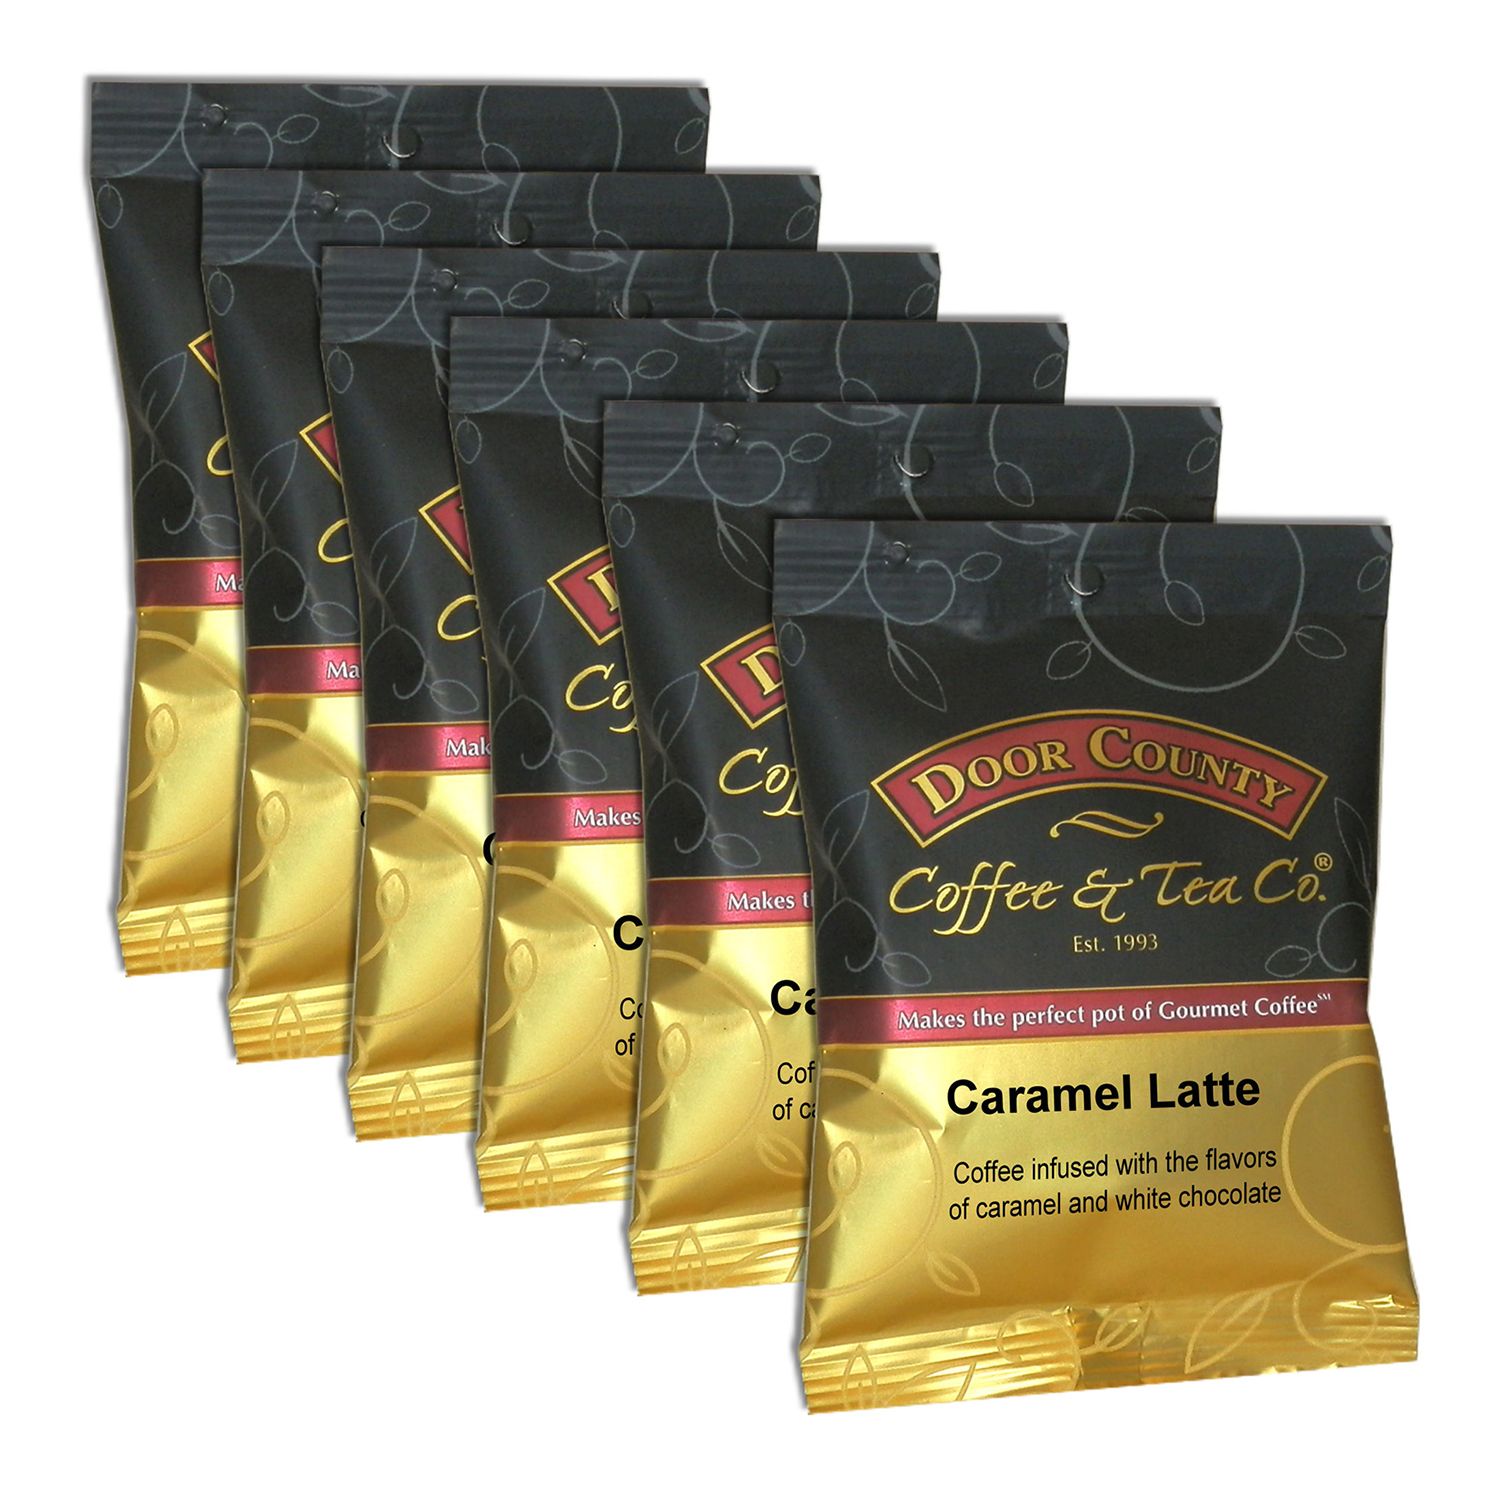 Image for Door County Coffee & Tea Co. Caramel Latte Ground Coffee 6-pk. at Kohl's.